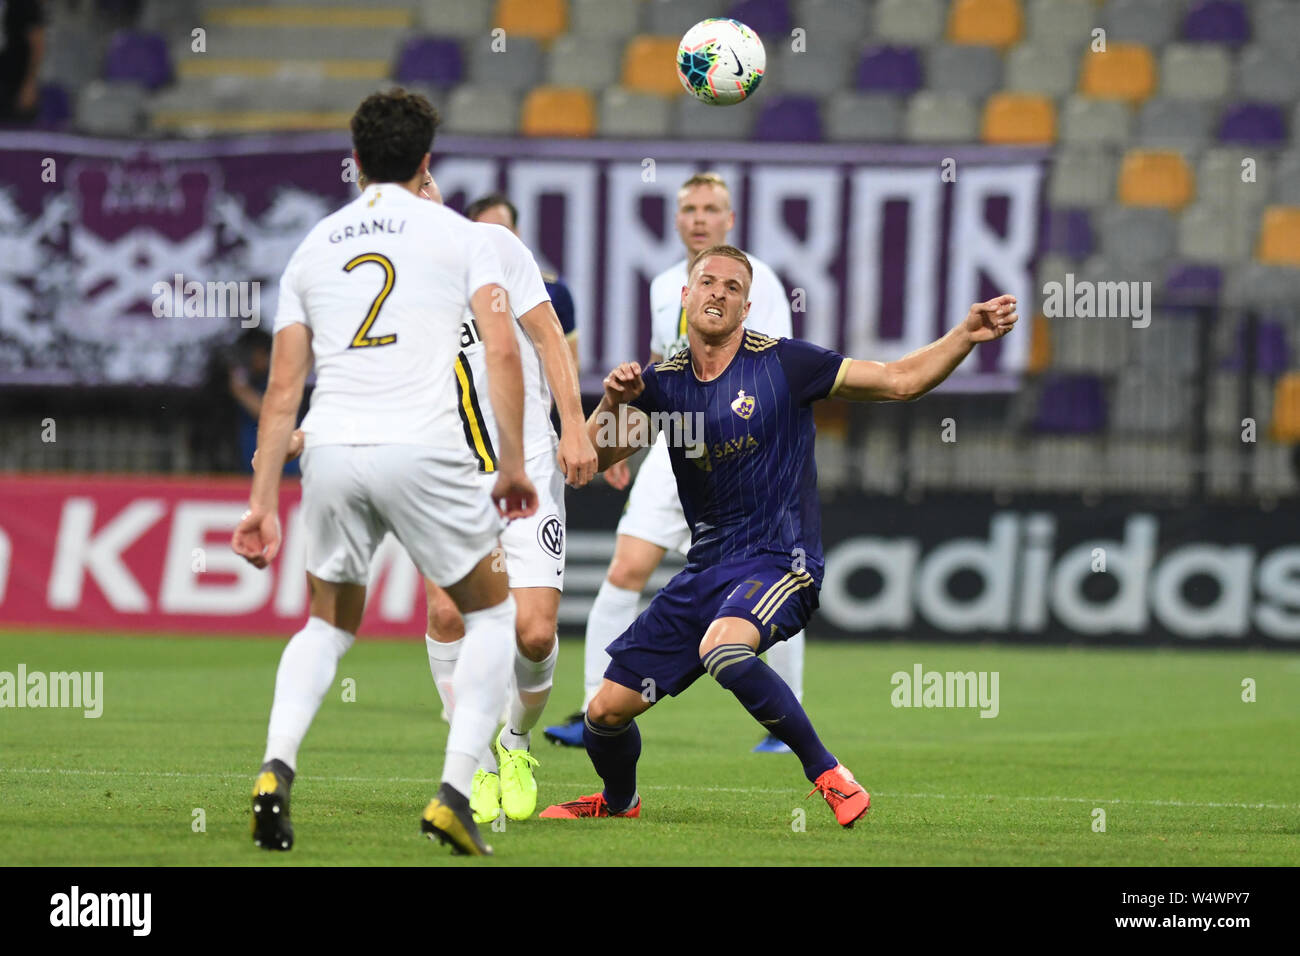 Maribor, Slovenia. 24th July, 2019. Daniel Granli of AIK and Andrej Kotnik on Maribor in action during the Second qualifying round of the UEFA Champions League between NK Maribor and AIK Football at the Ljudski vrt stadium in Maribor.(Final score; Maribor 2:1 AIK) Credit: SOPA Images Limited/Alamy Live News Stock Photo